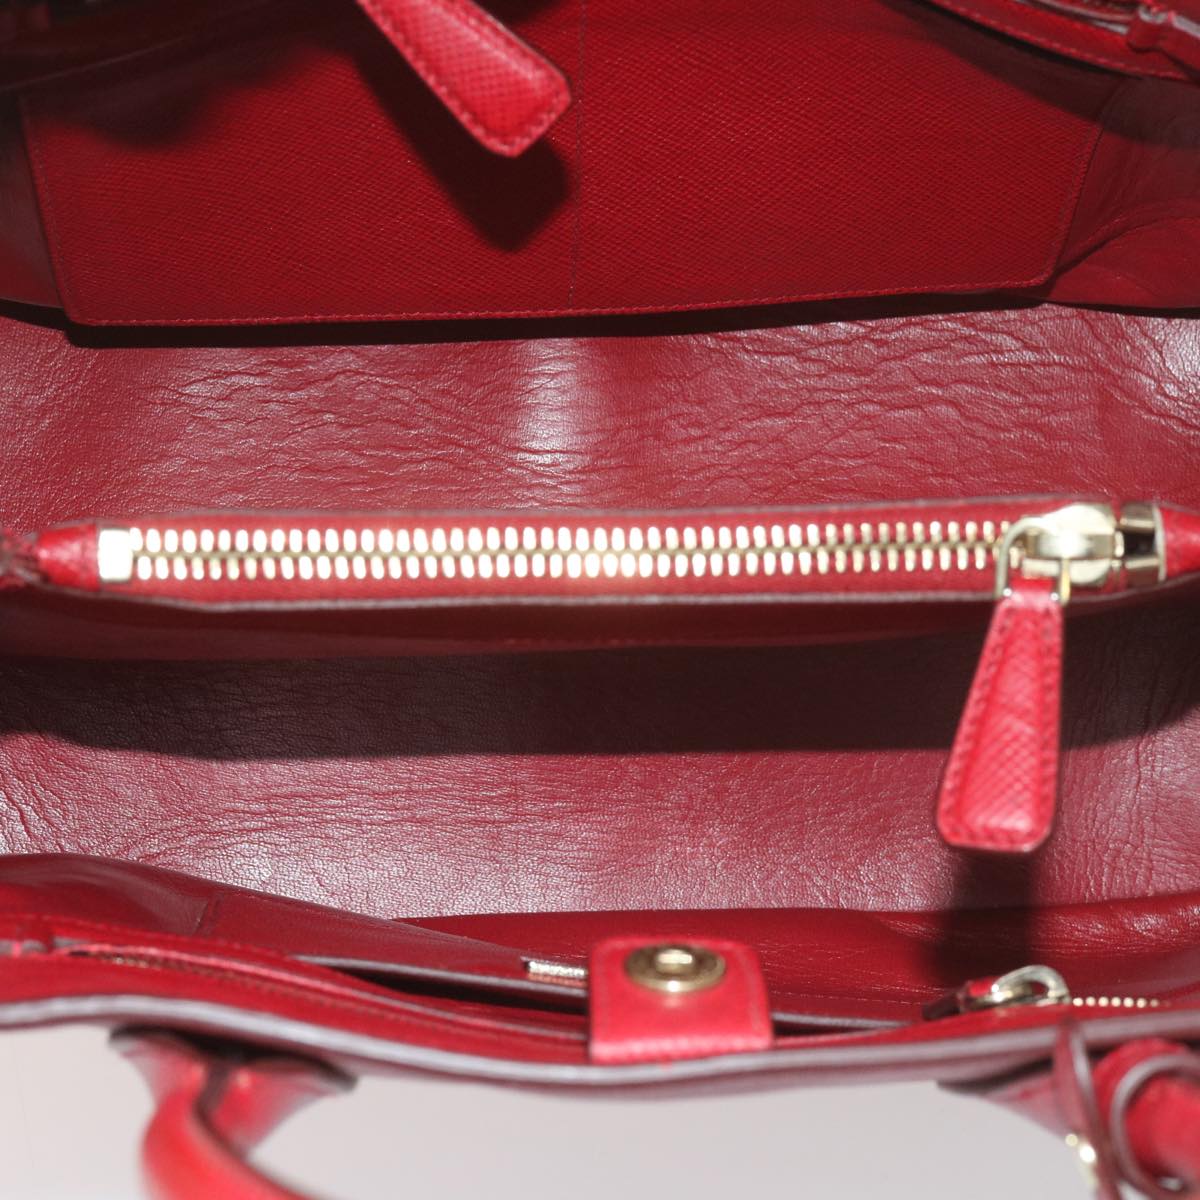 PRADA Hand Bag Leather 2way Red Auth bs10429